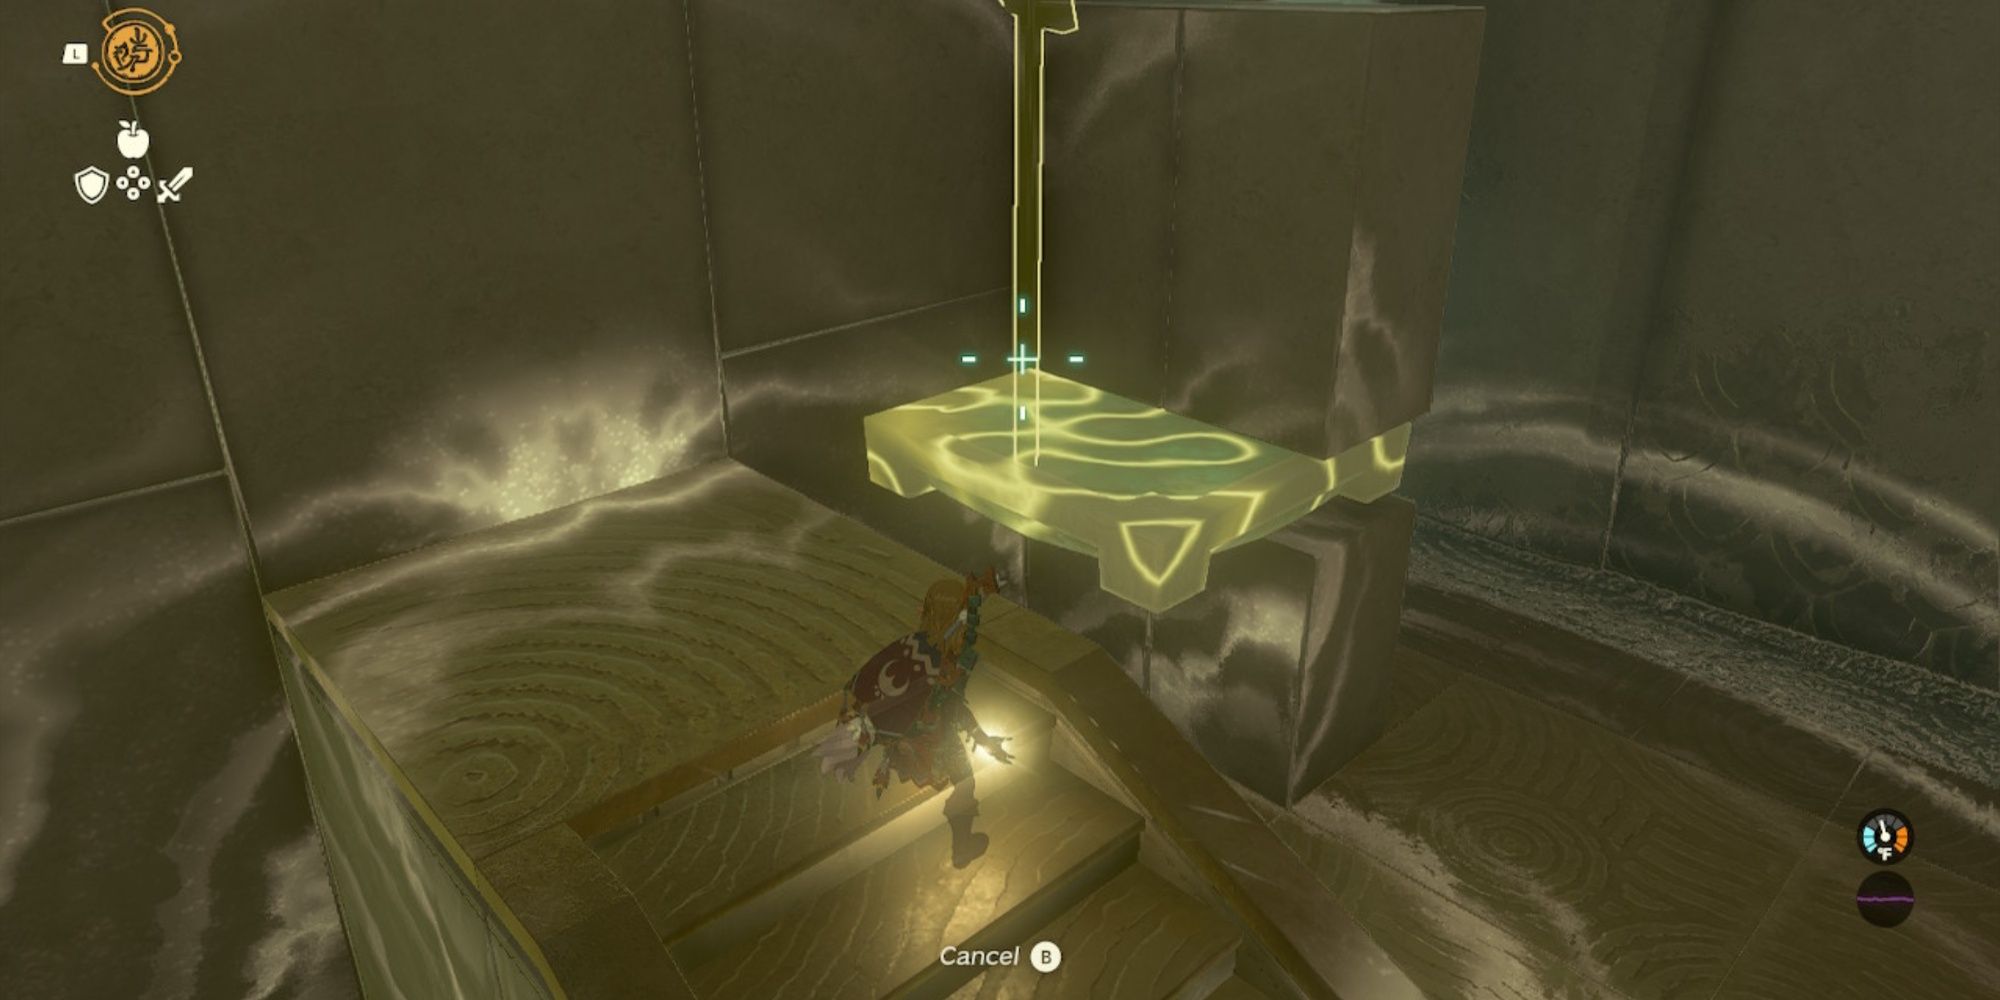 Link using the Recall function to reverse the direction the platform is moving at the Sepapa Shrine in The Legend of Zelda: Tears of the Kingdom